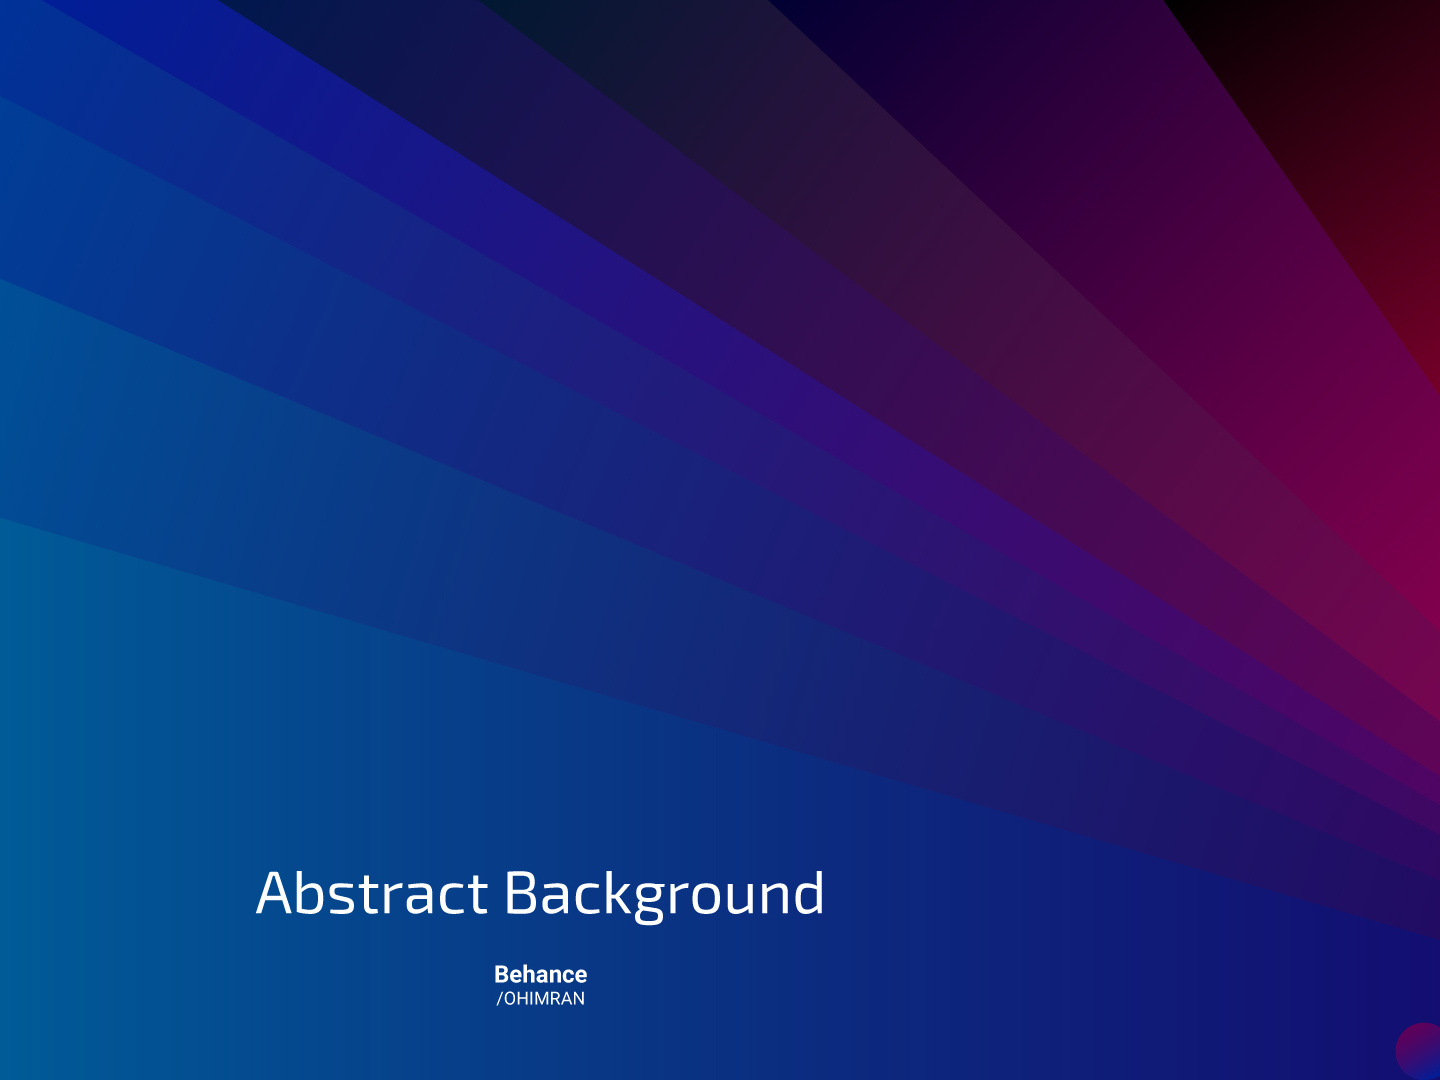 Abstract Background Design In Adobe Illustrator By